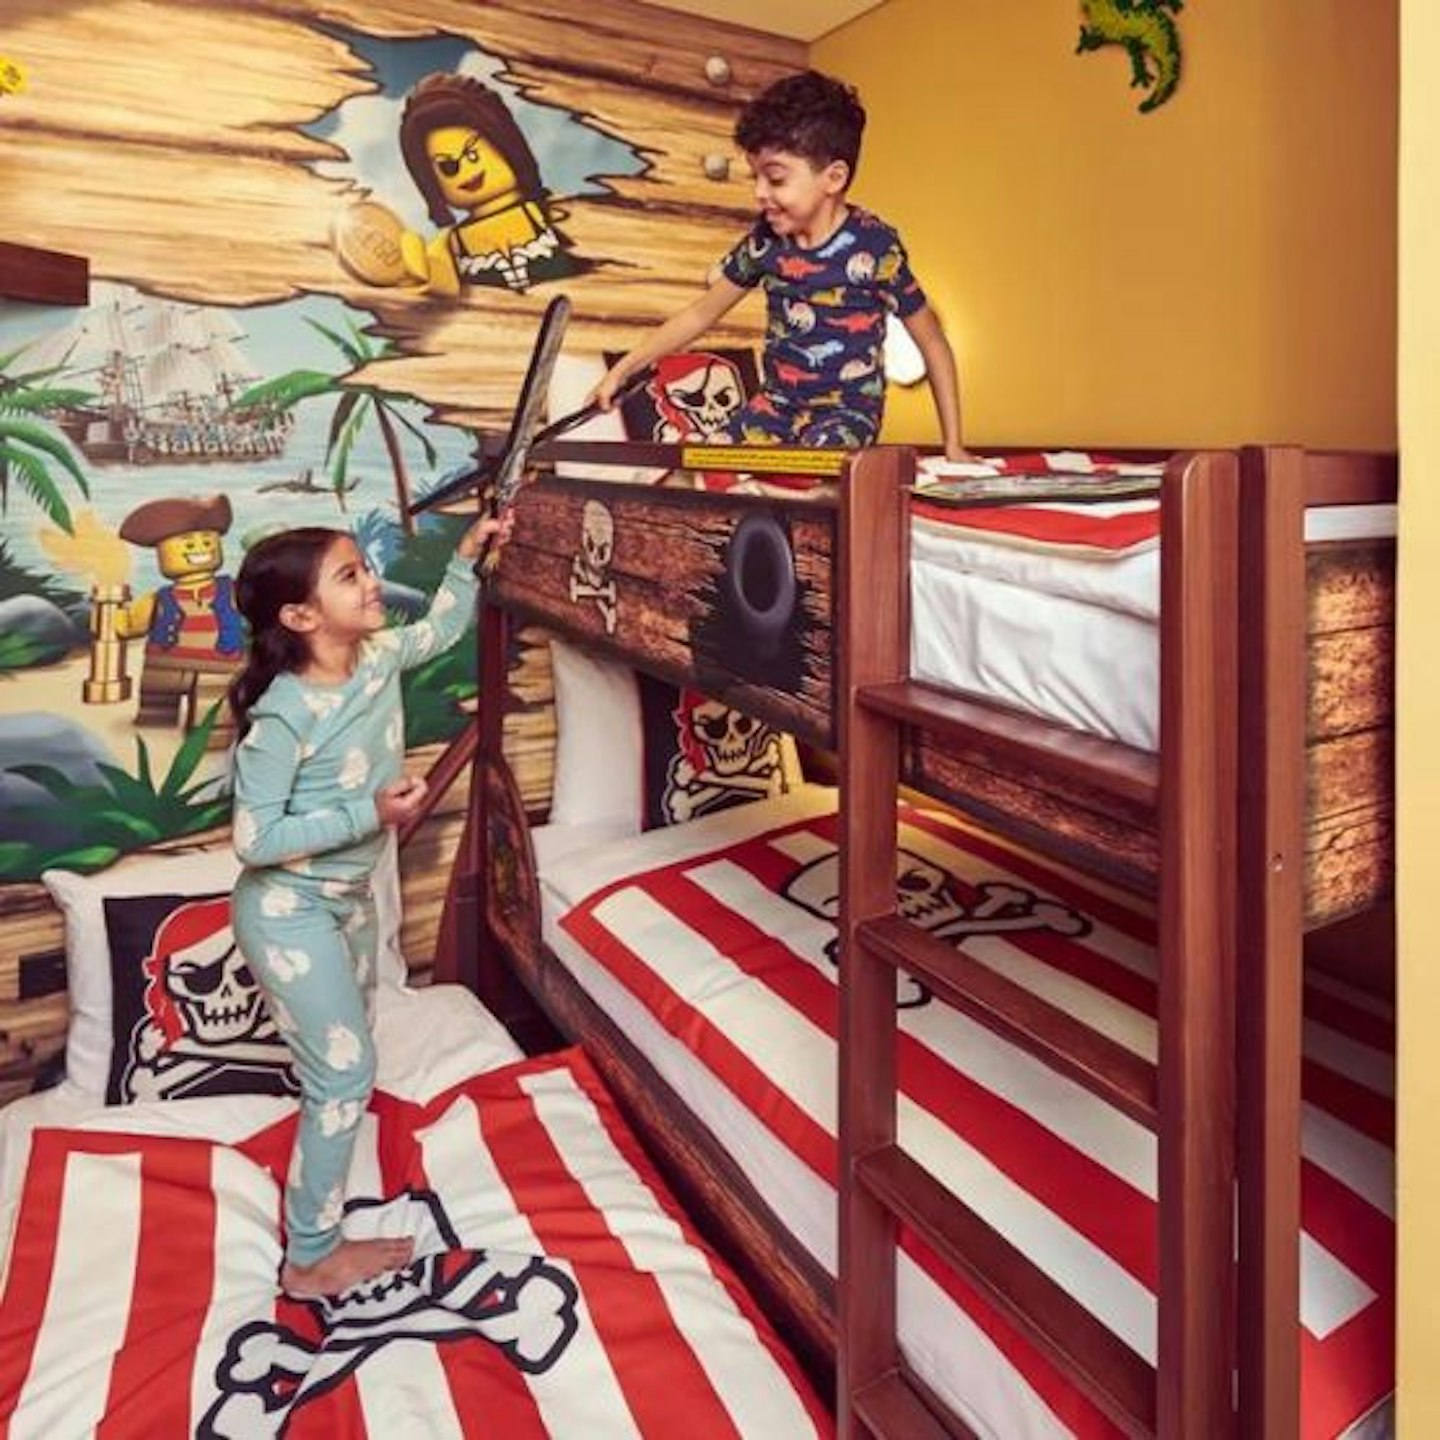 Children playing in a pirate themed hotel room in Legoland Dubai